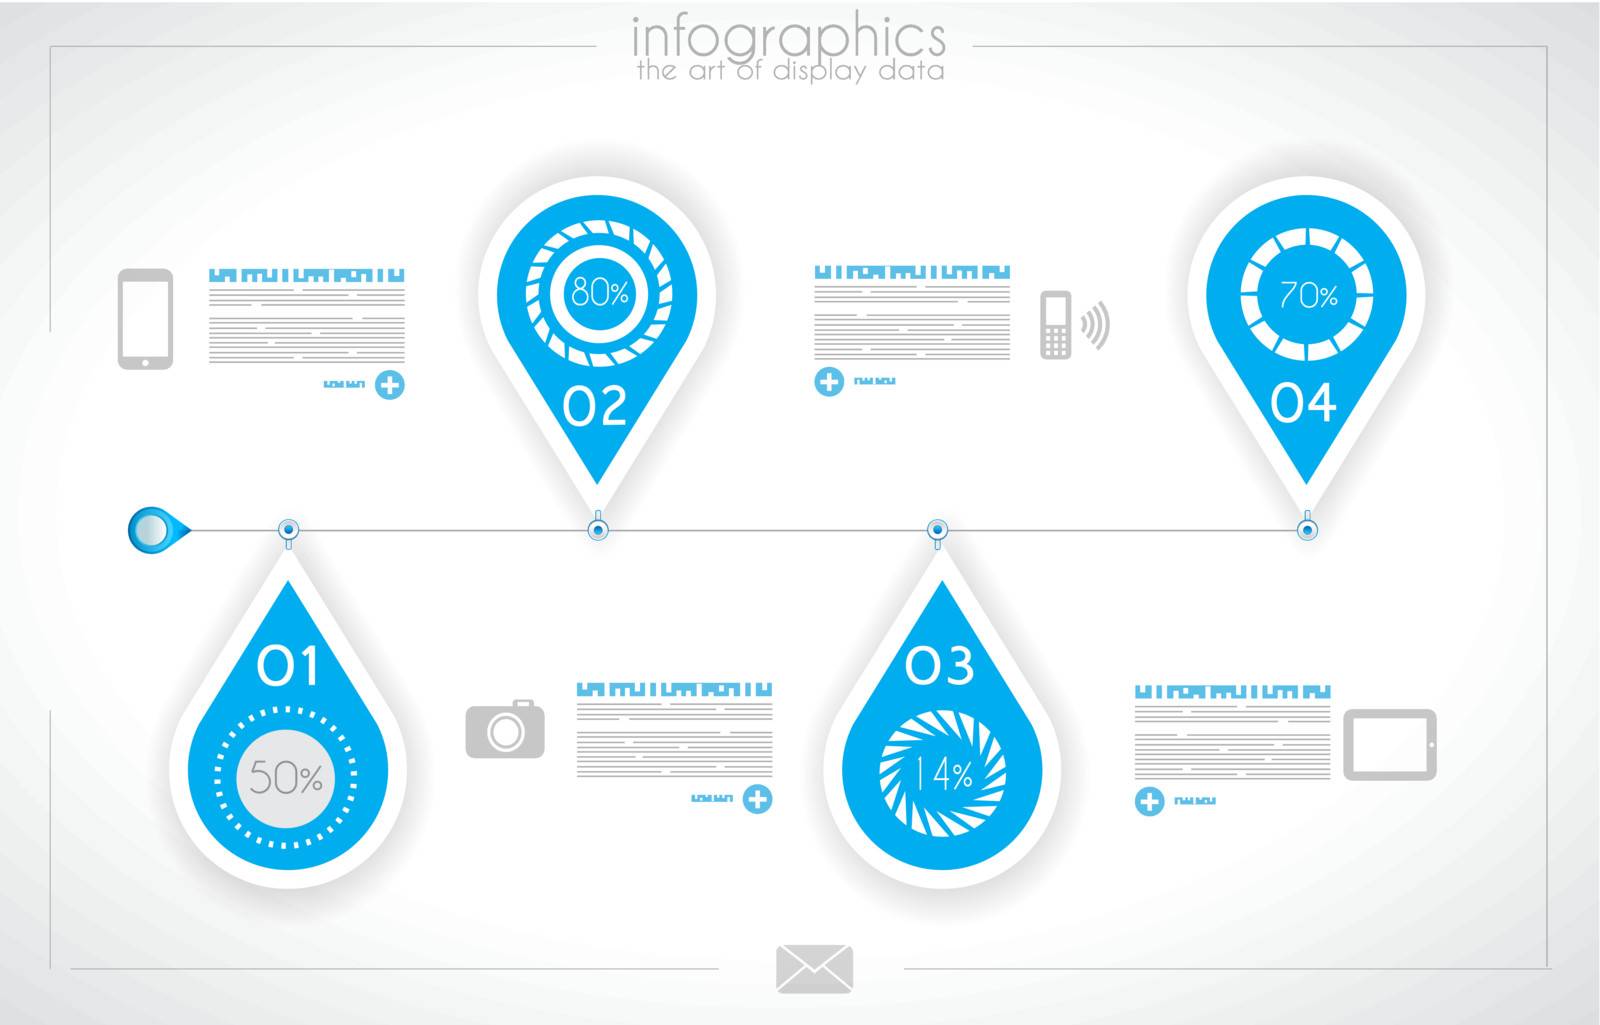 Infographic design for product ranking  by DavidArts